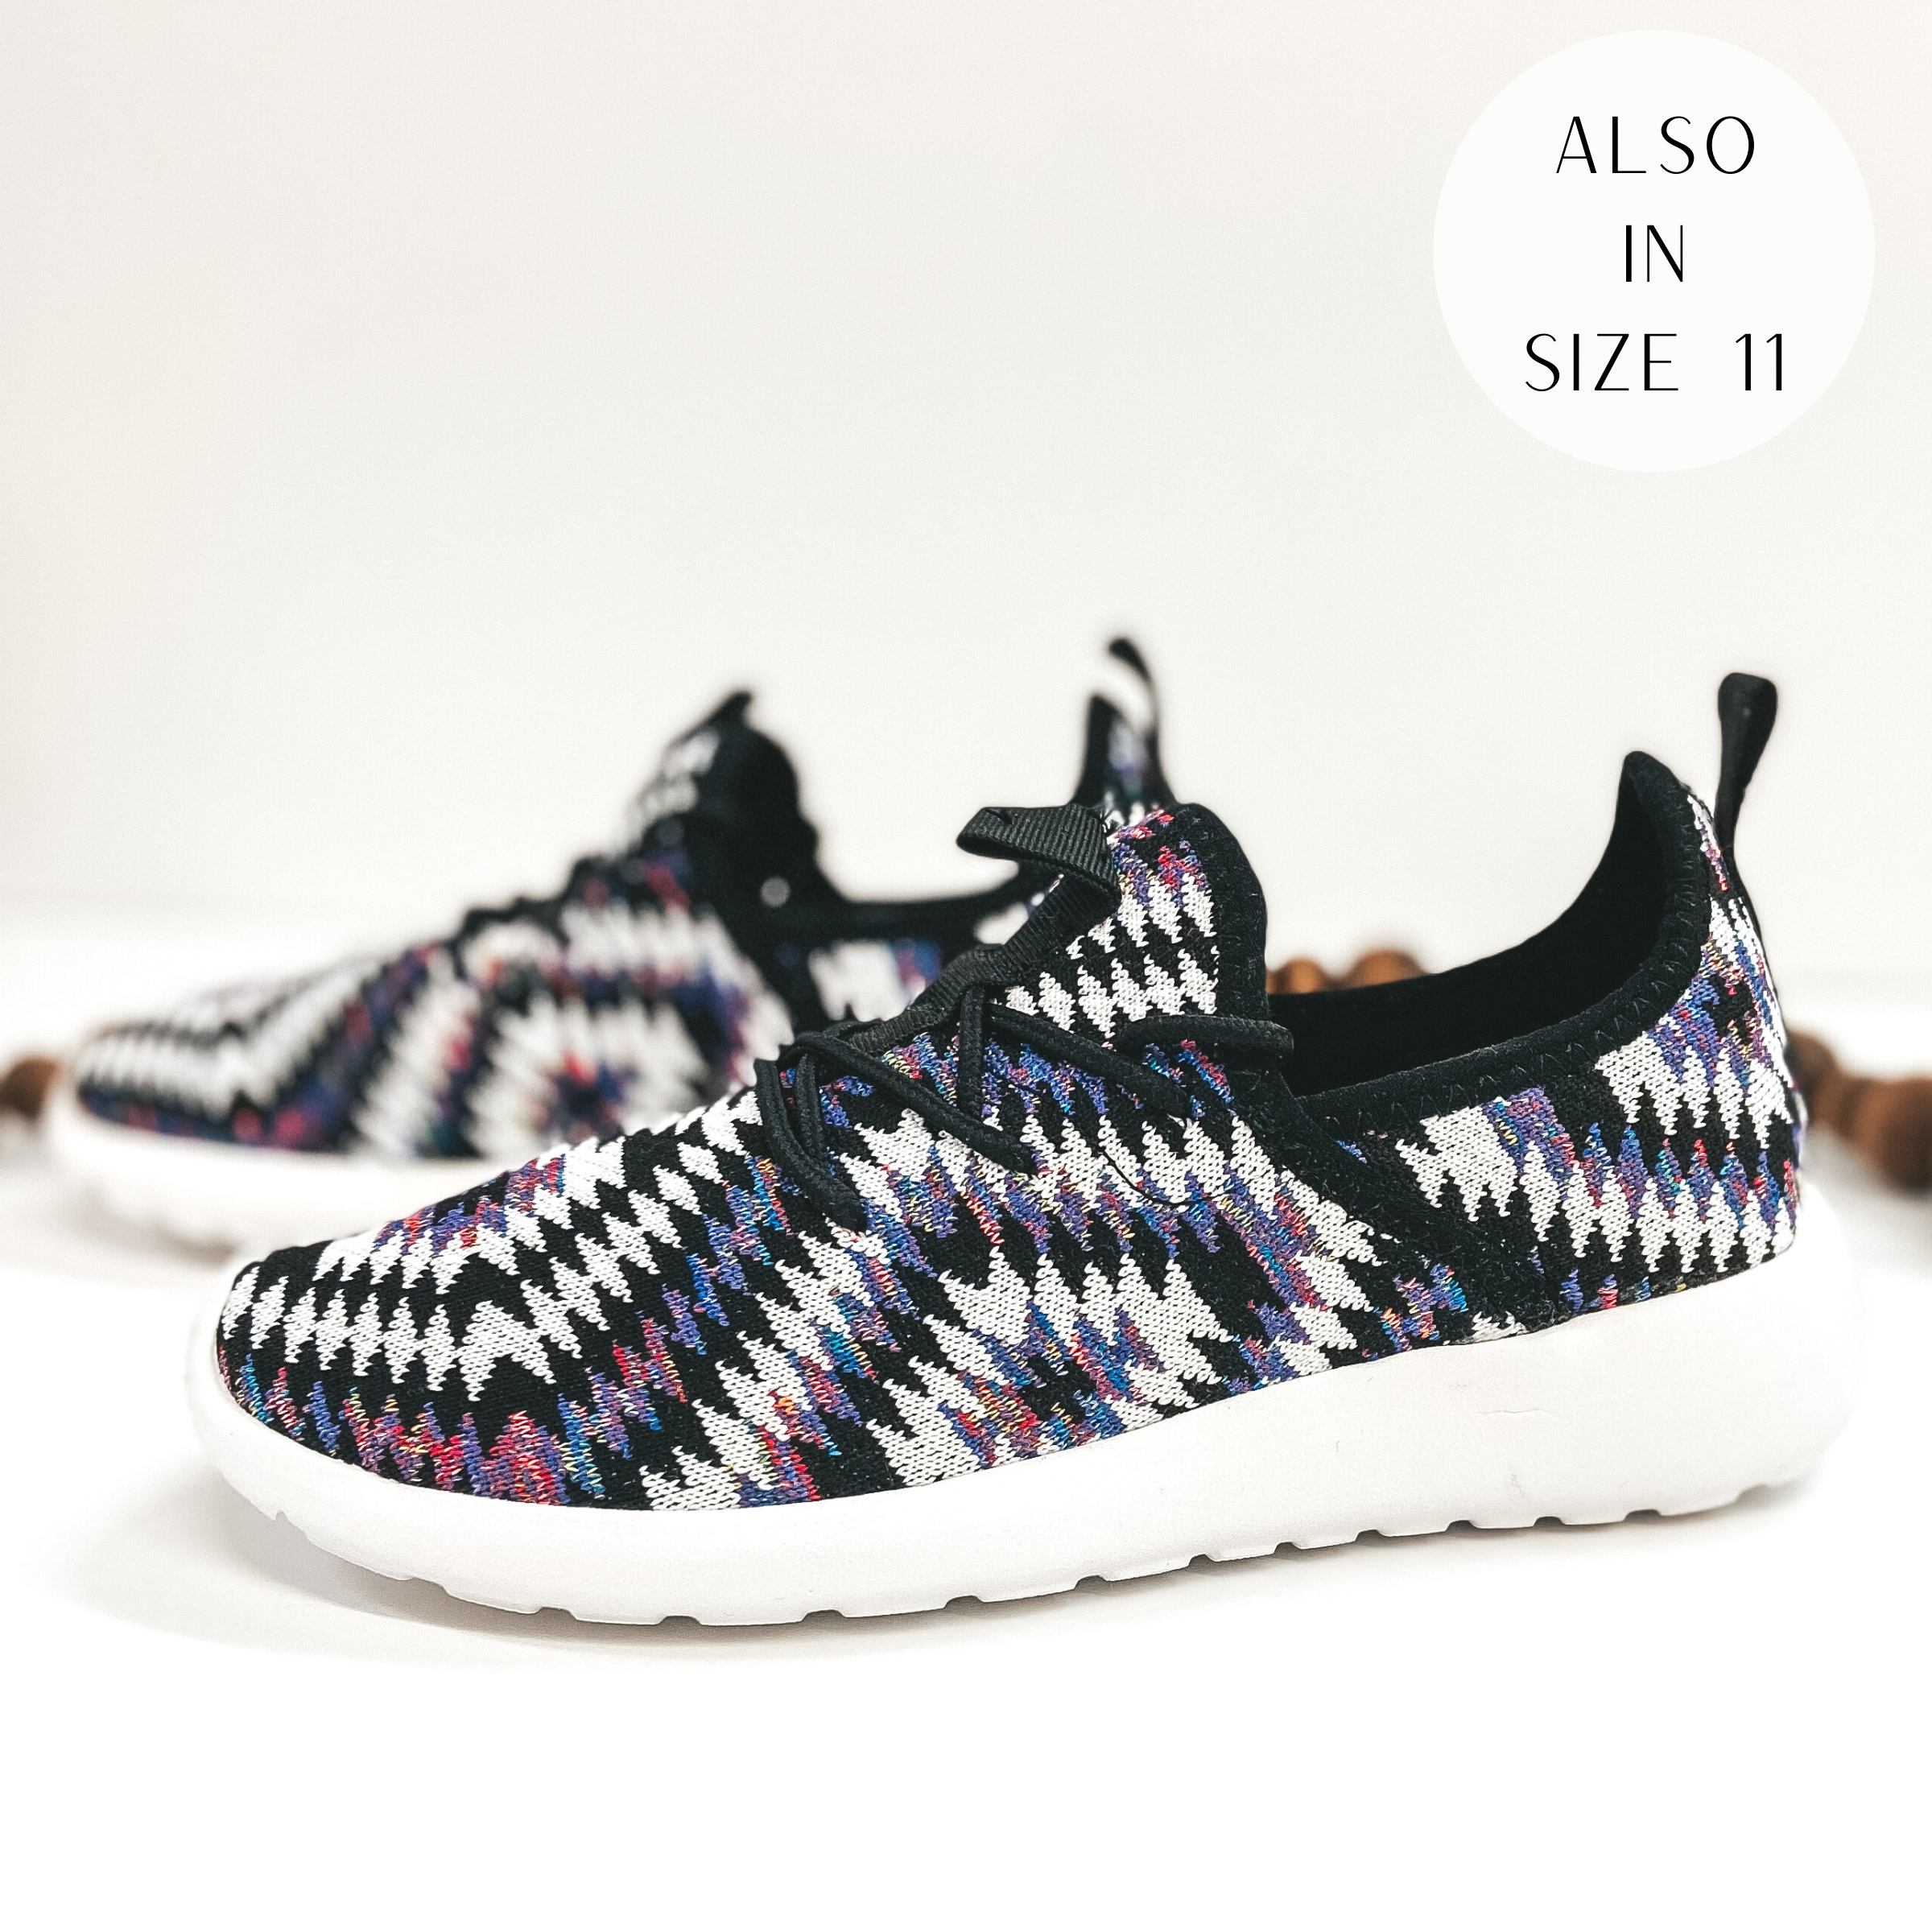 A pair of purple and black aztec print sneakers. Pictured on white background with brown beads.